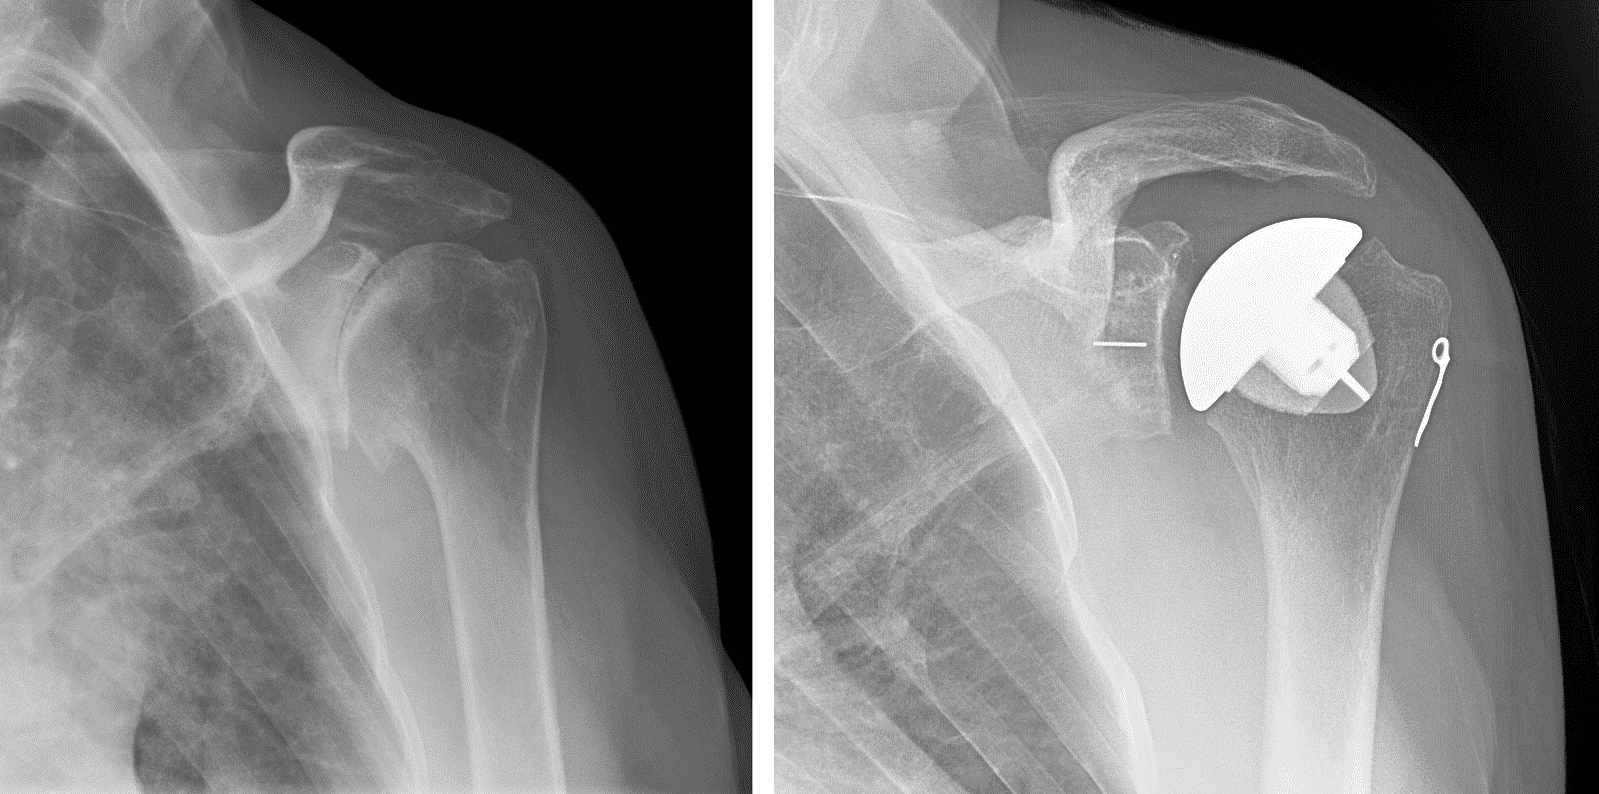 X-rays after anatomical total shoulder replacement surgery for osteoarthritis.